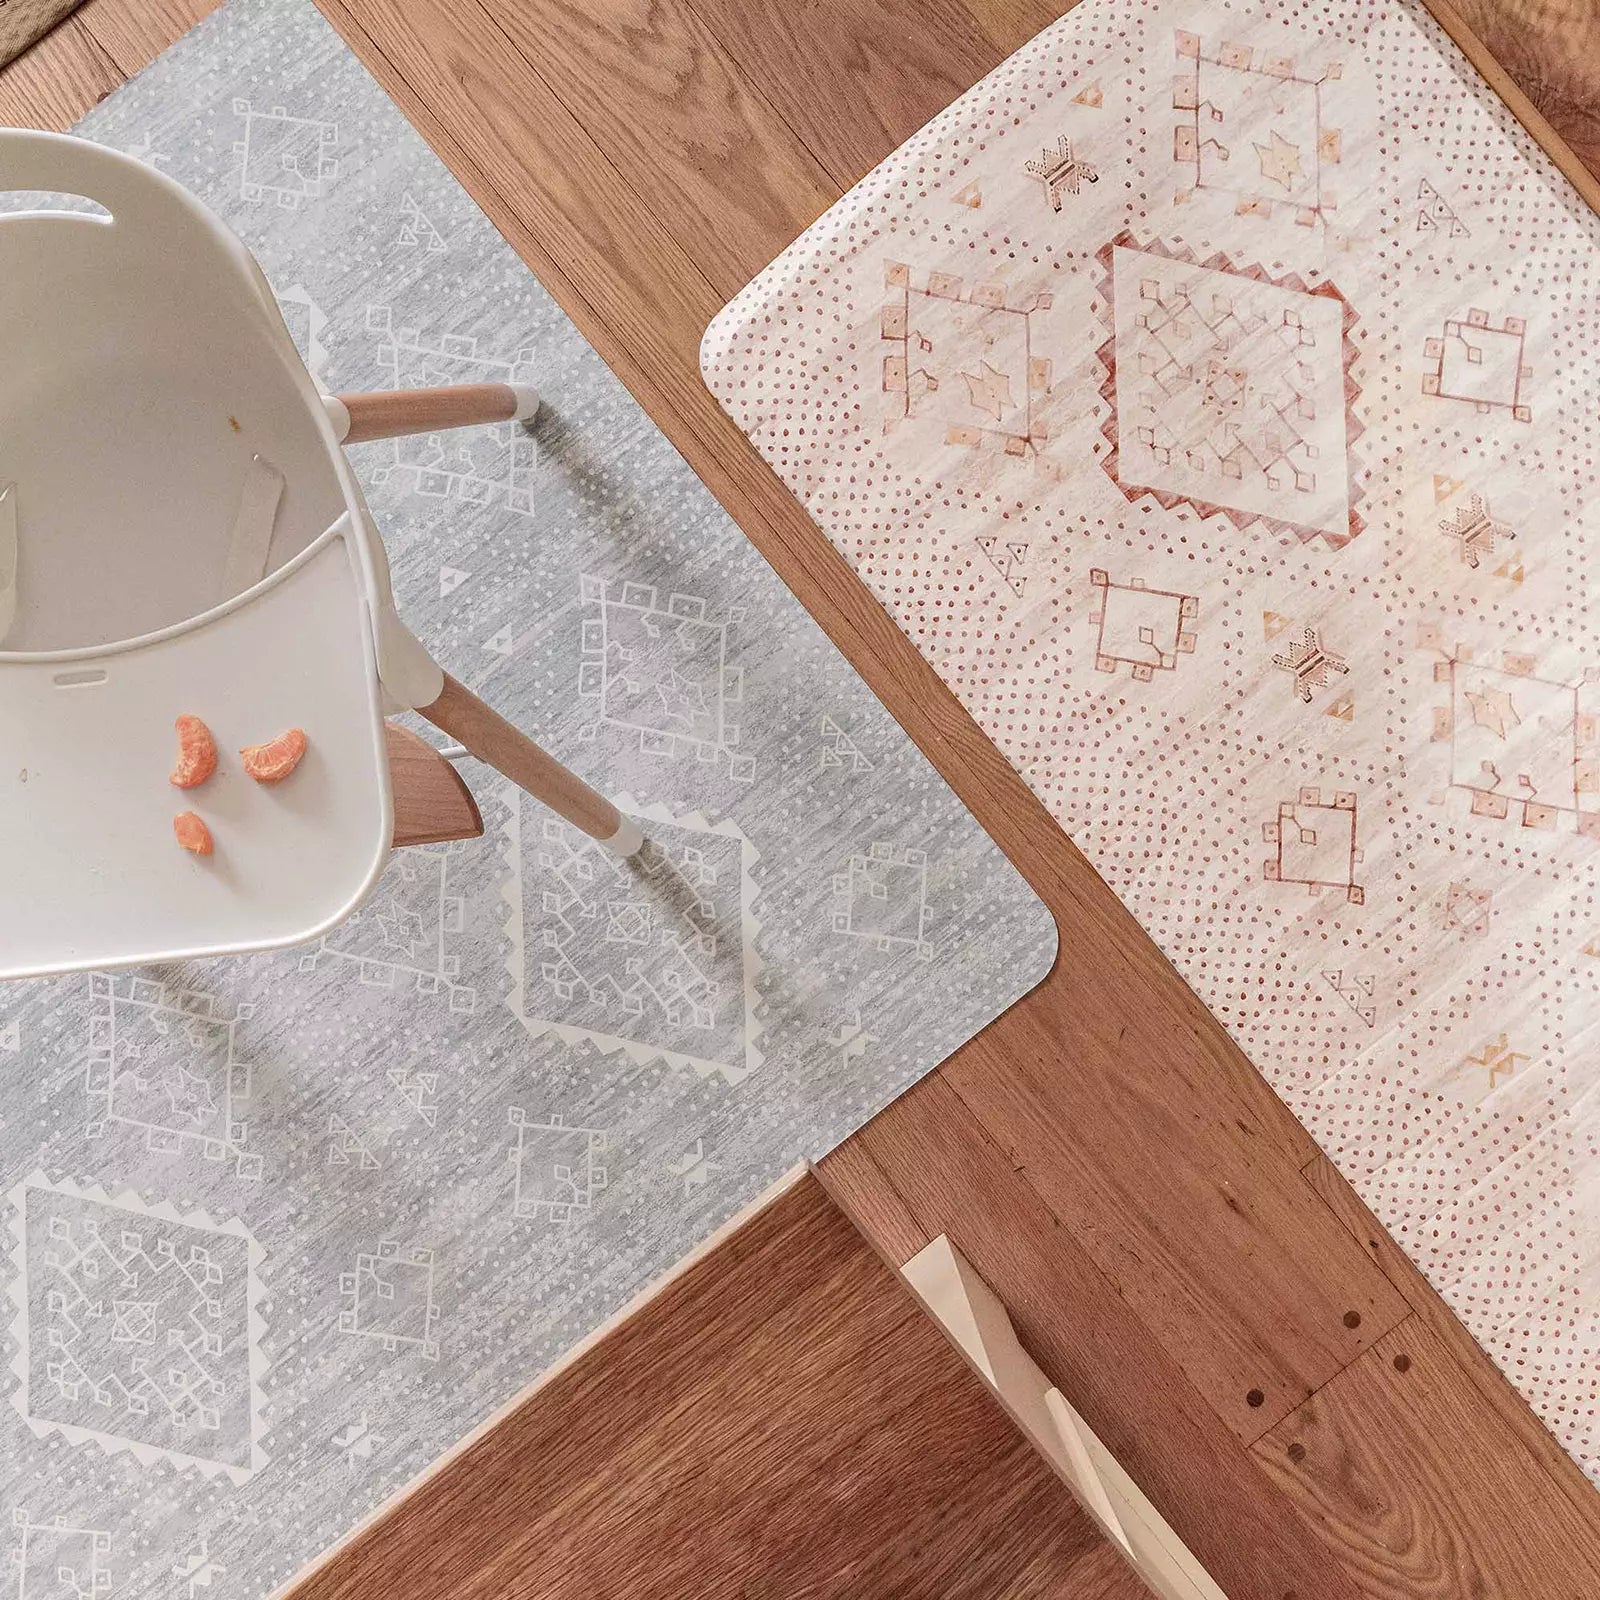 Ula Gray Minimal Boho Pattern highchair mat shown in kitchen from above